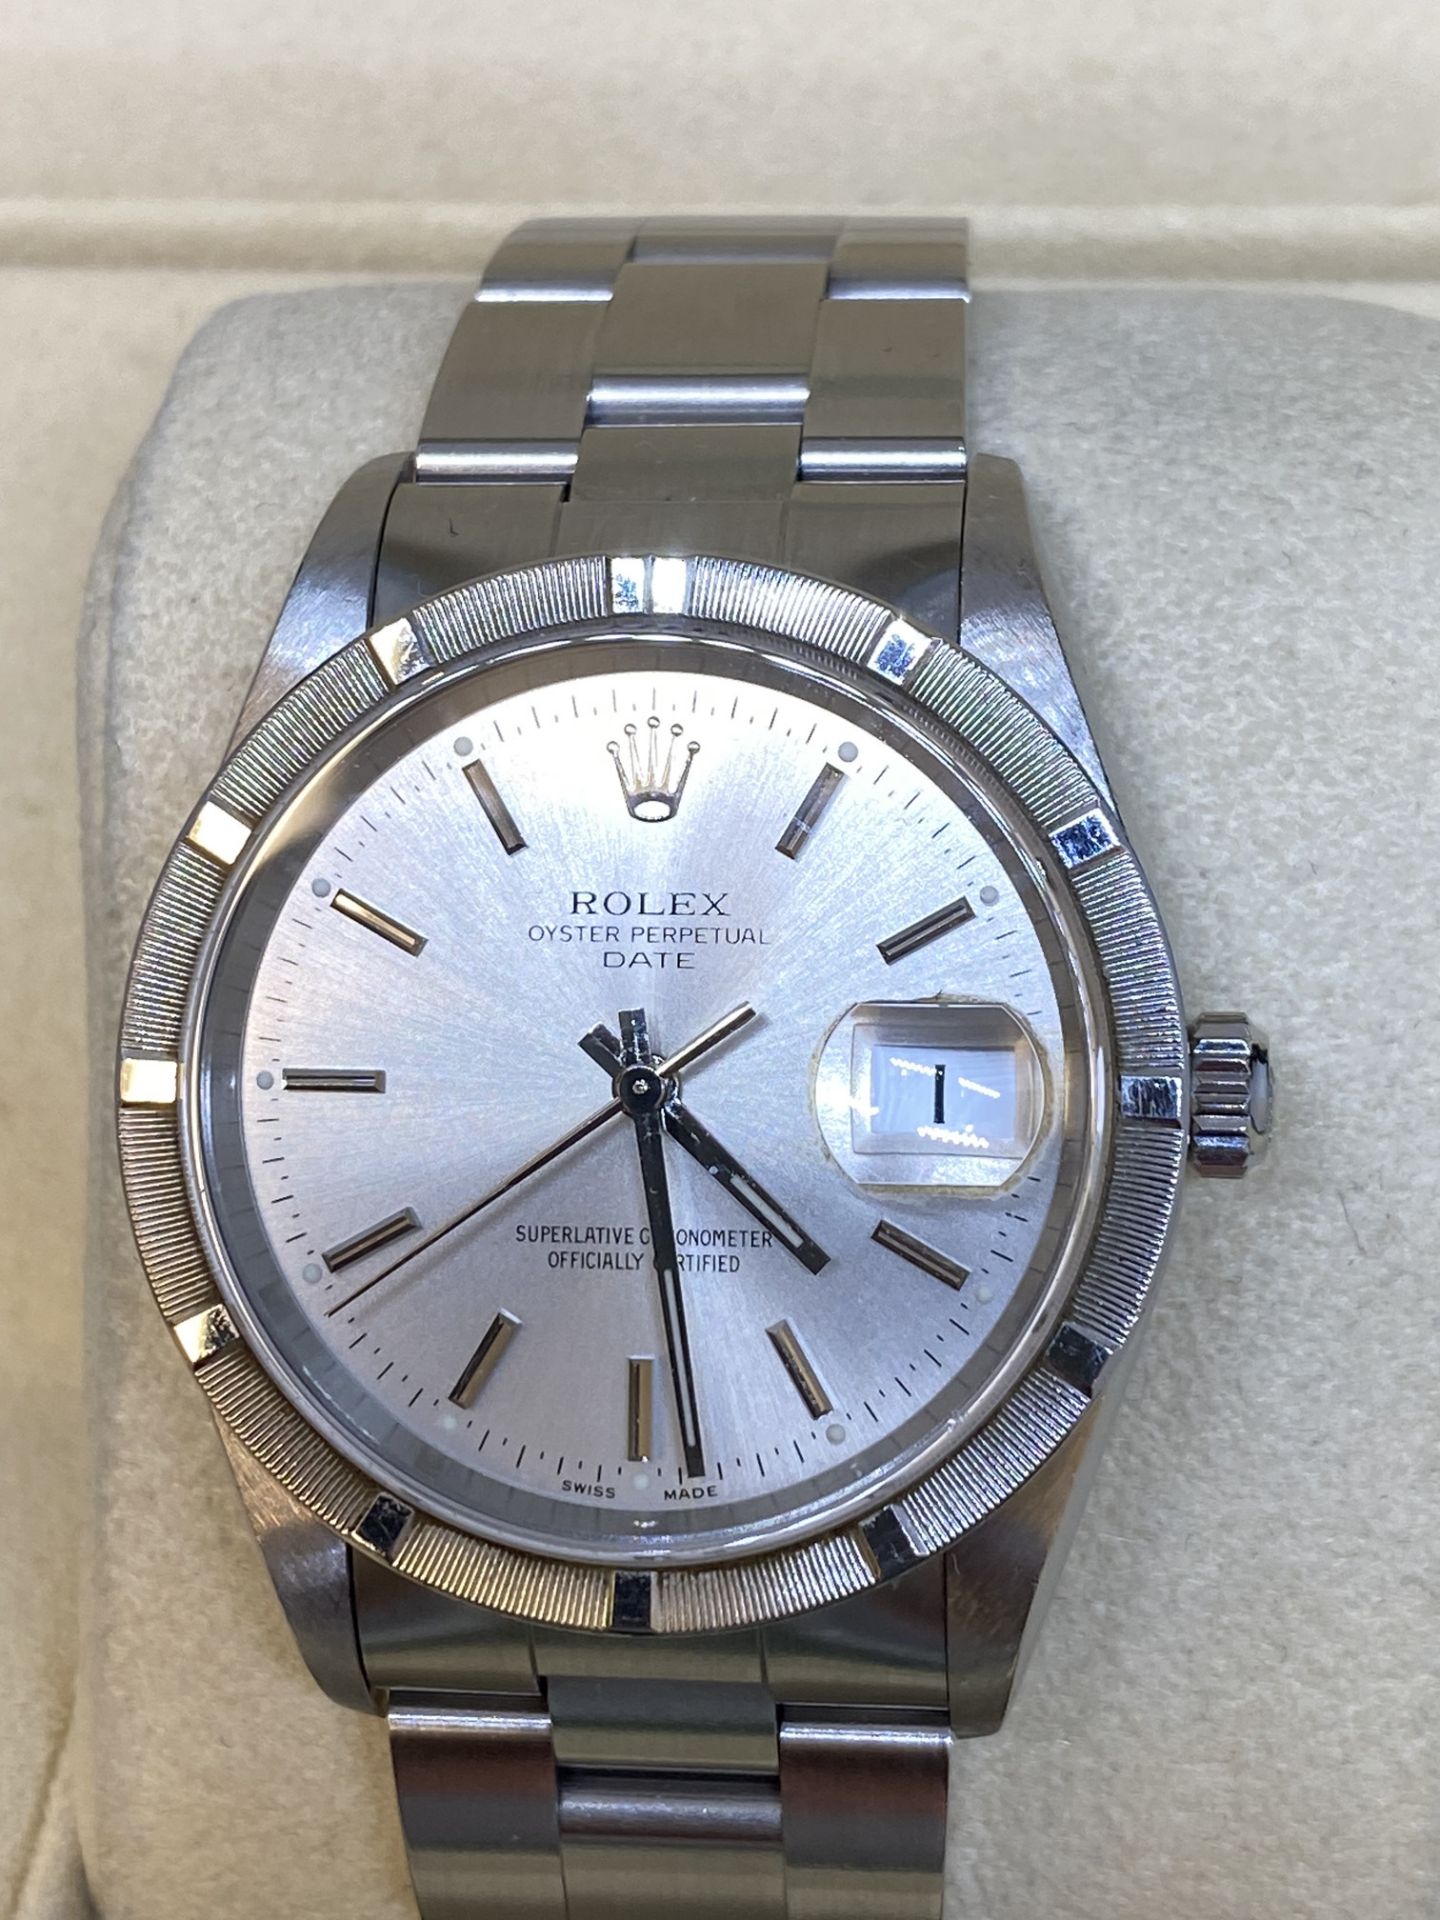 STAINLESS STEEL ROLEX 15210 AUTOMATIC WATCH WITH BOX - Image 4 of 11